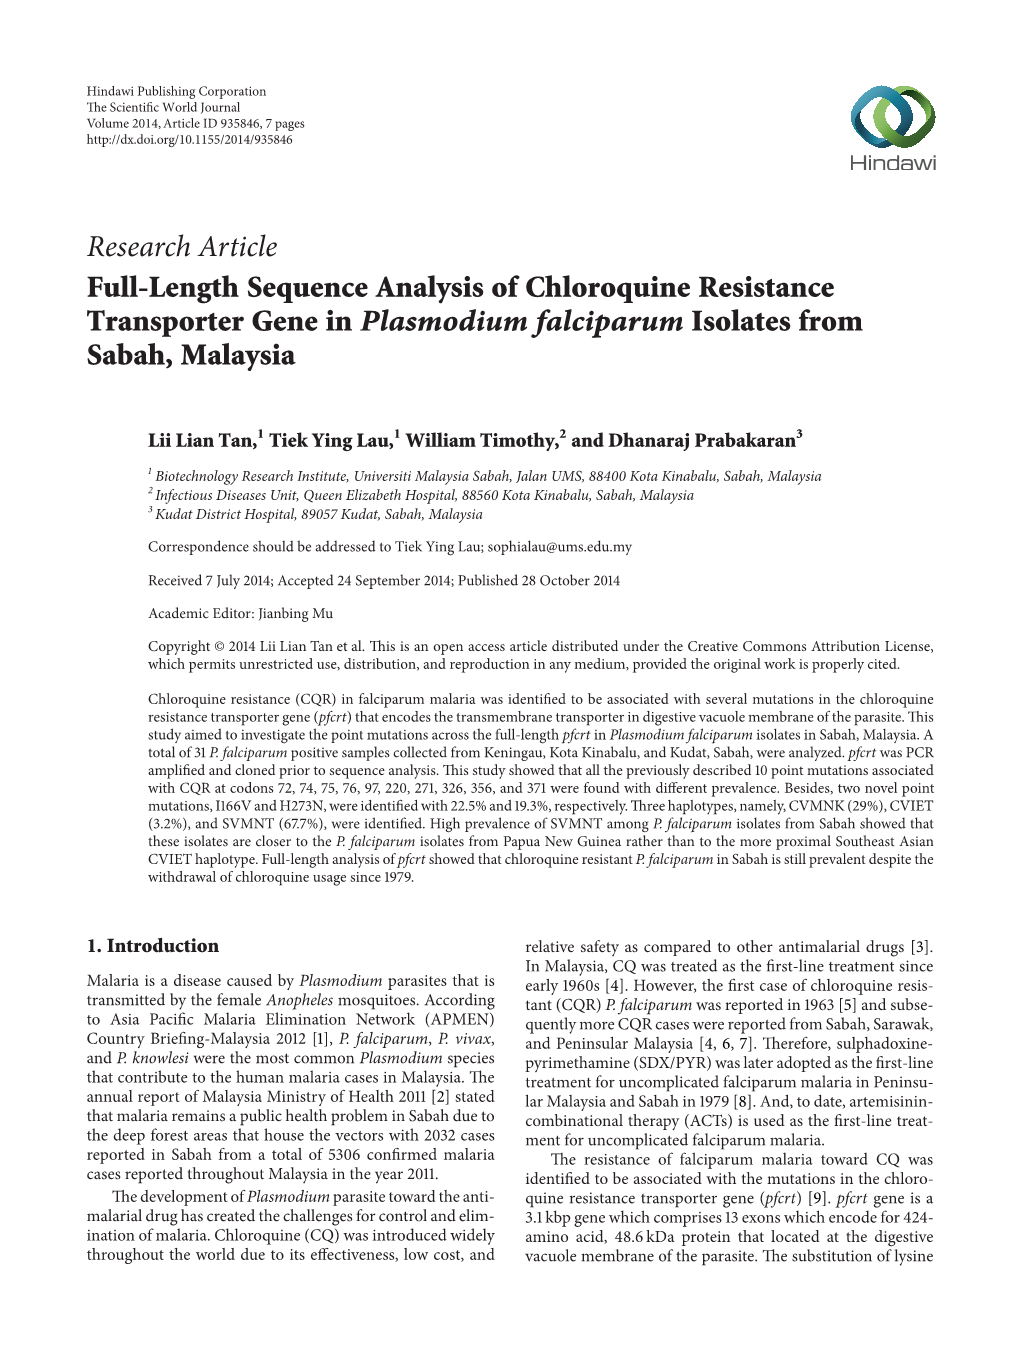 Full-Length Sequence Analysis of Chloroquine Resistance Transporter Gene in Plasmodium Falciparum Isolates from Sabah, Malaysia